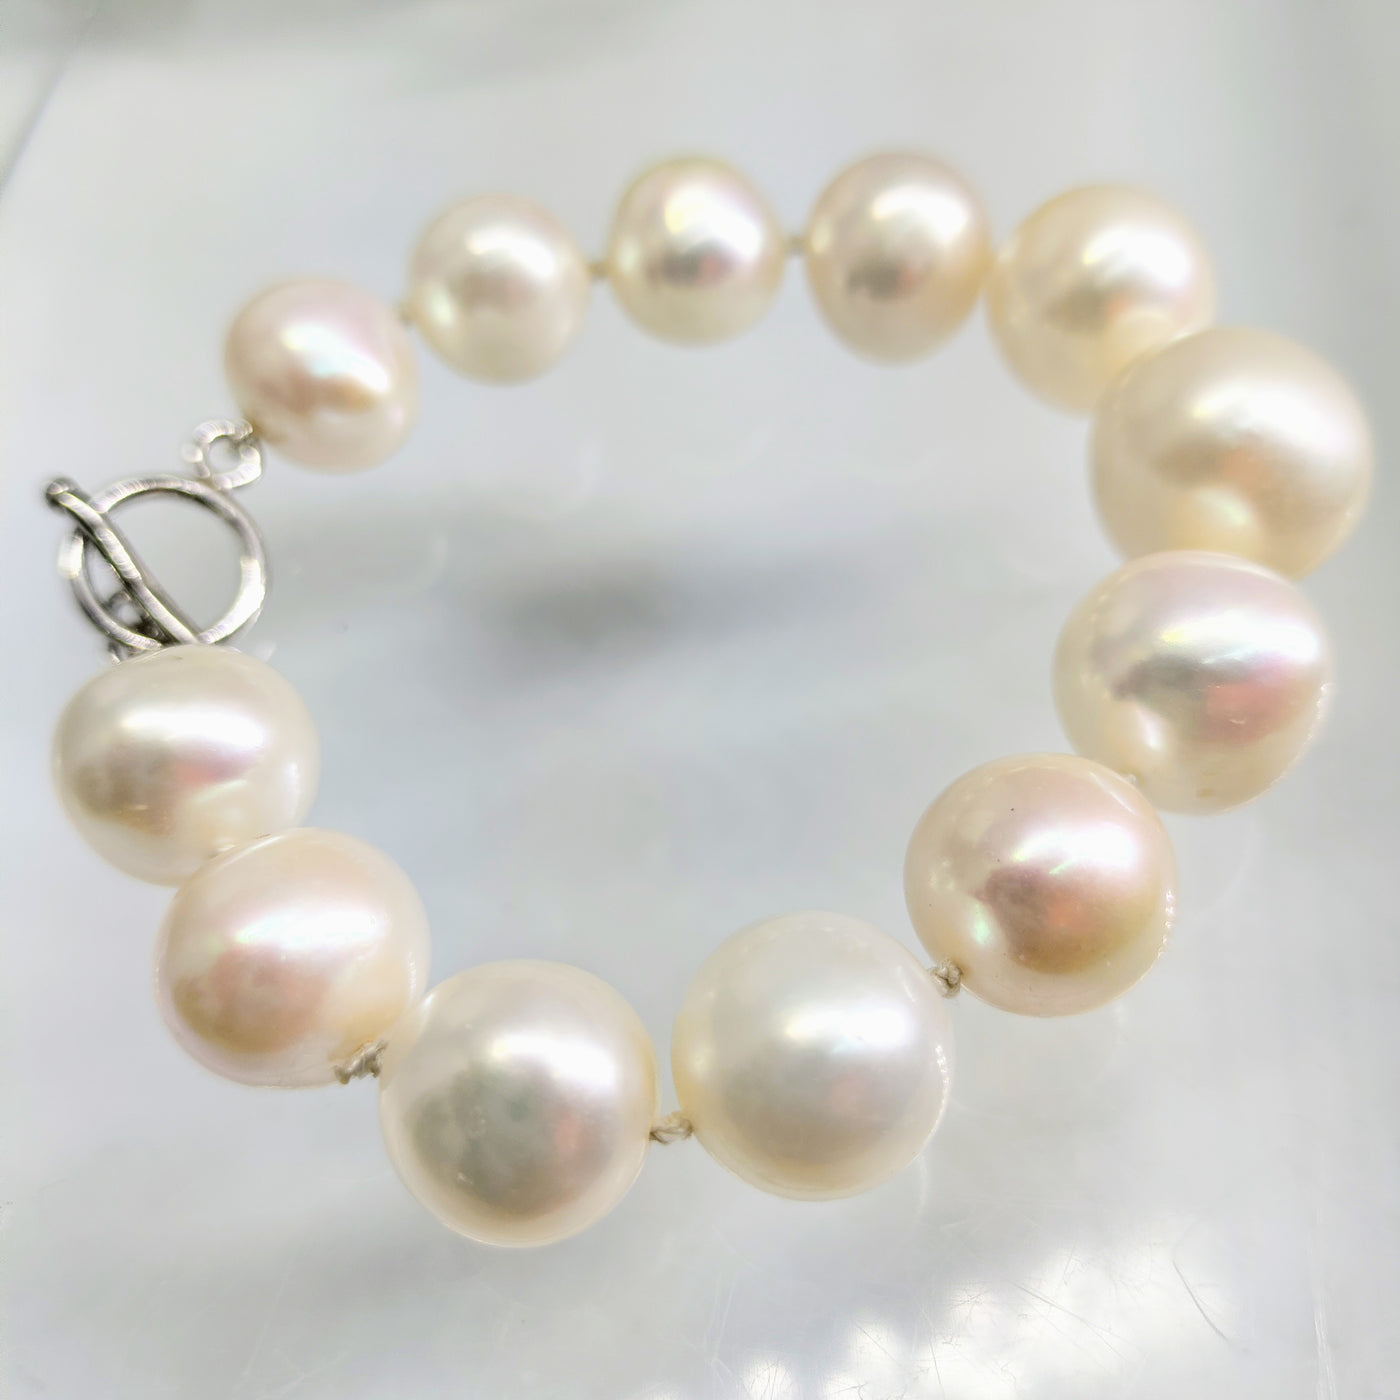 "Some Balls" Bracelet - Pearls, Sterling Toggle Claps